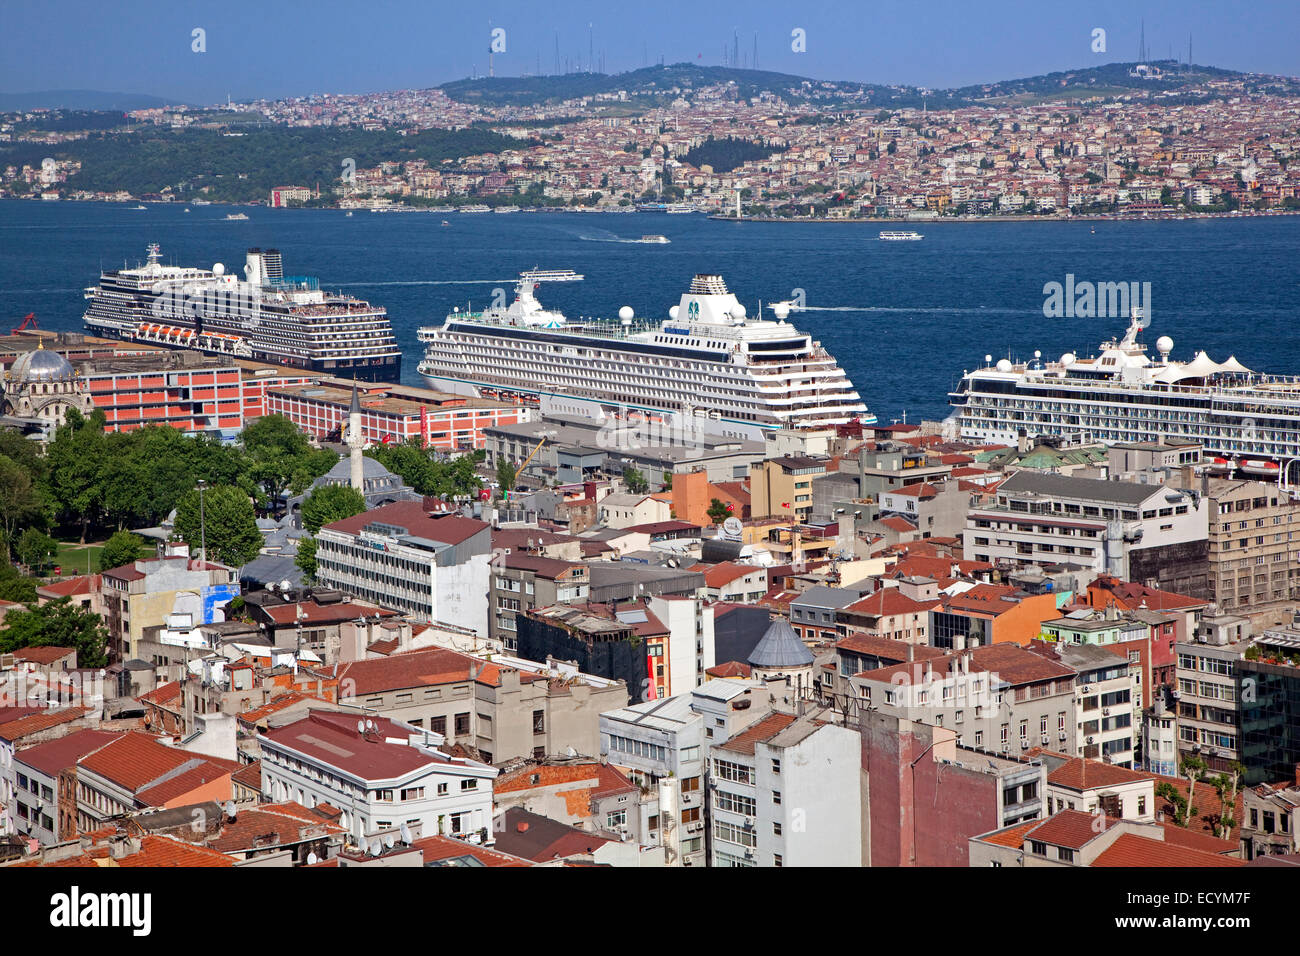 Cruise ships on the Bosporus River and bird's eye view over the city Istanbul, Turkey Stock Photo